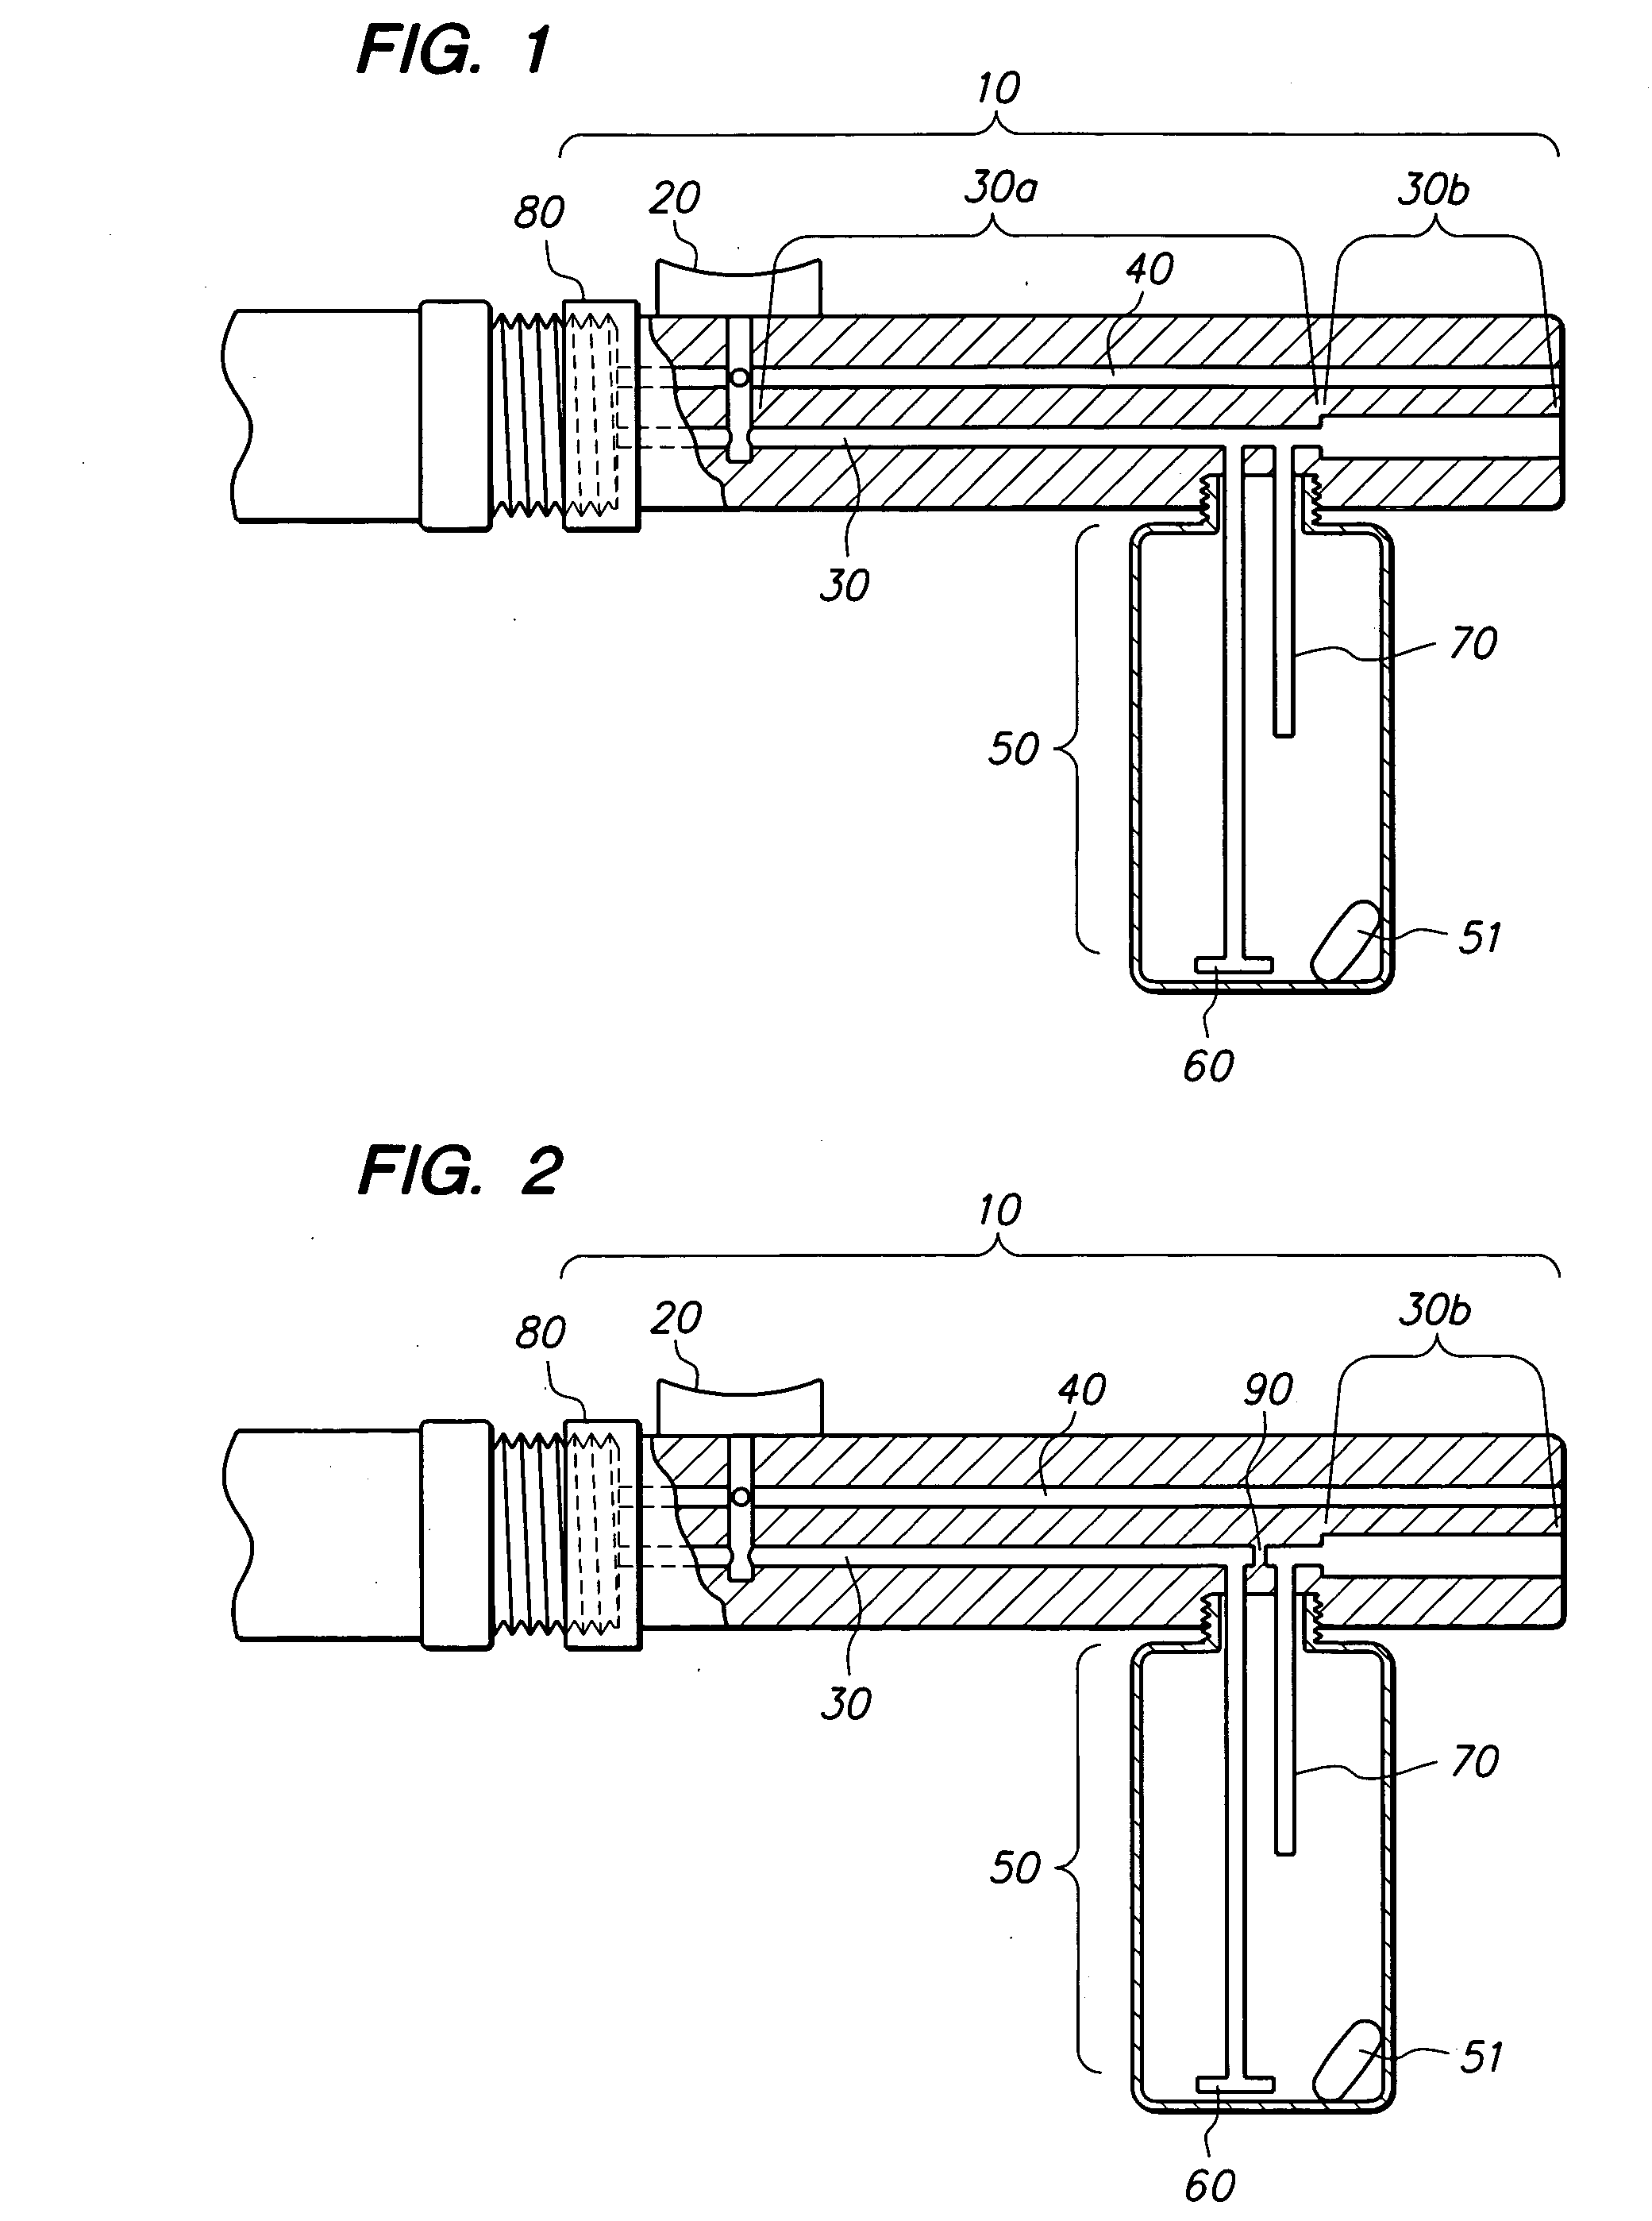 Multi-barreled sprayer for selective spraying a plurality of substances and / or rinse water